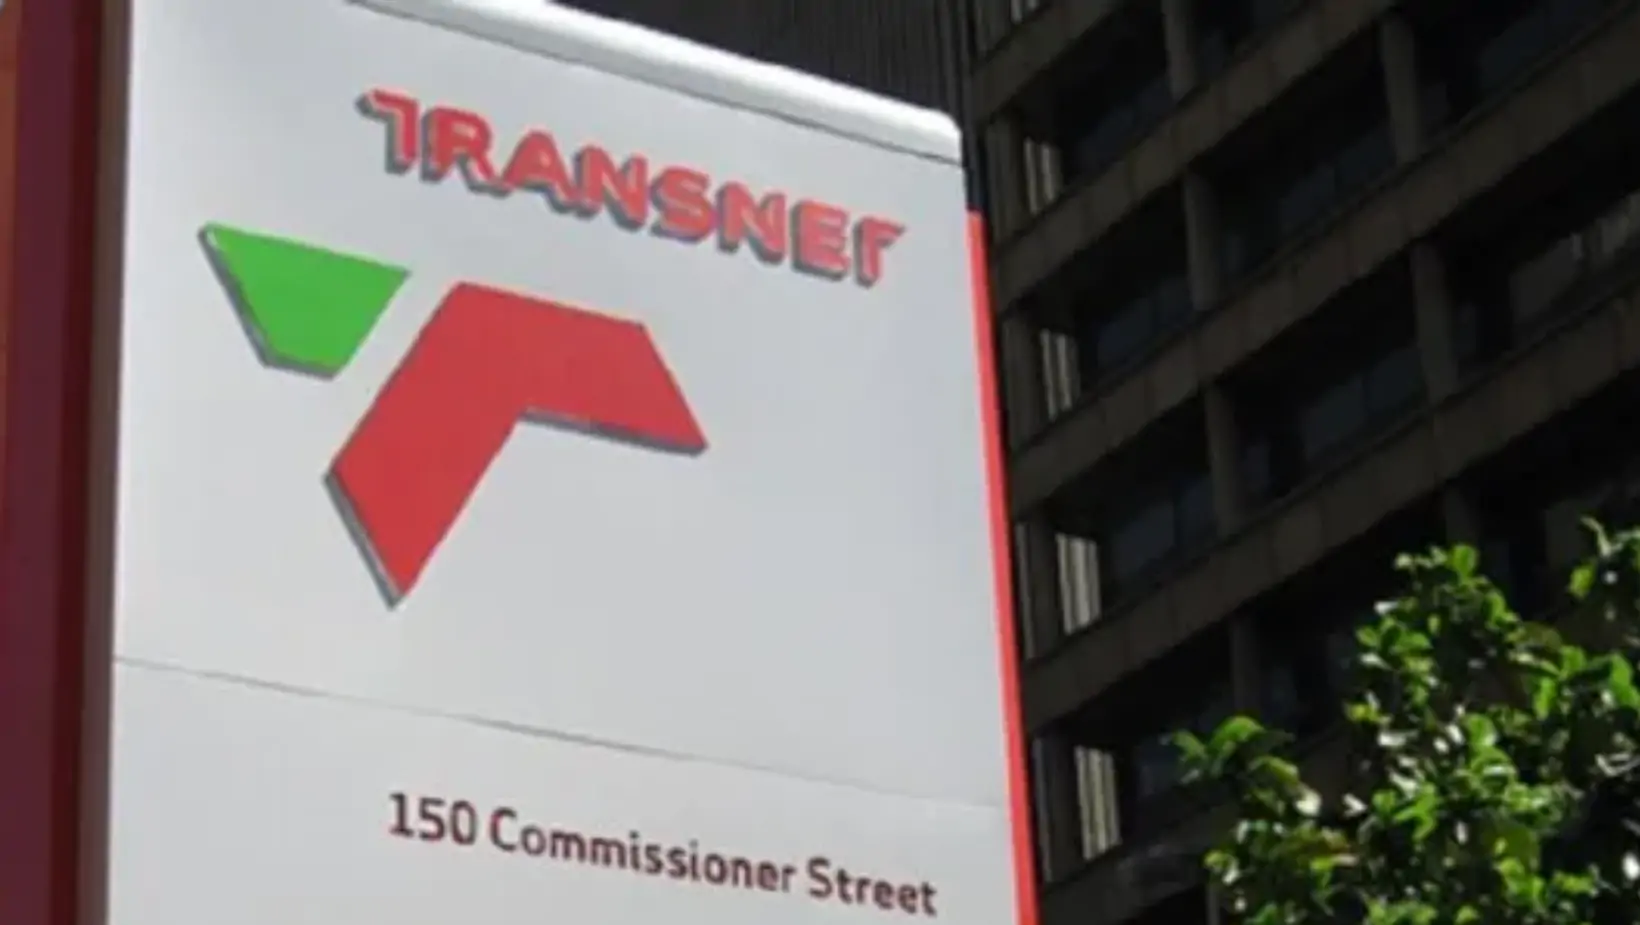 Transnet’s Revised Supply Chain Management Policy